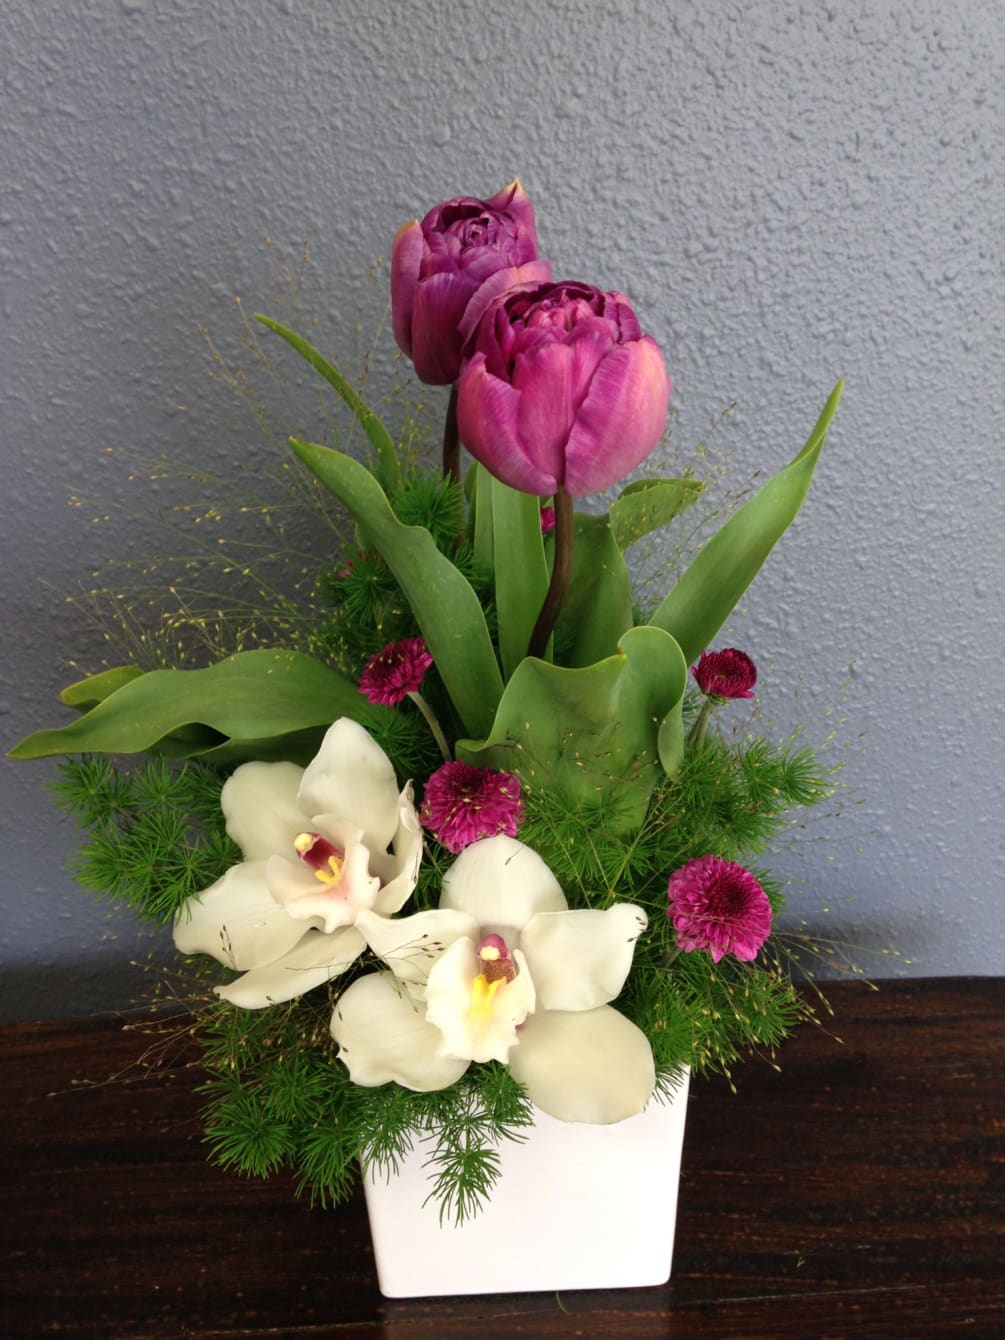 Cute arrangement with Tulips, Orchids with explosion grass in a ceramic vase